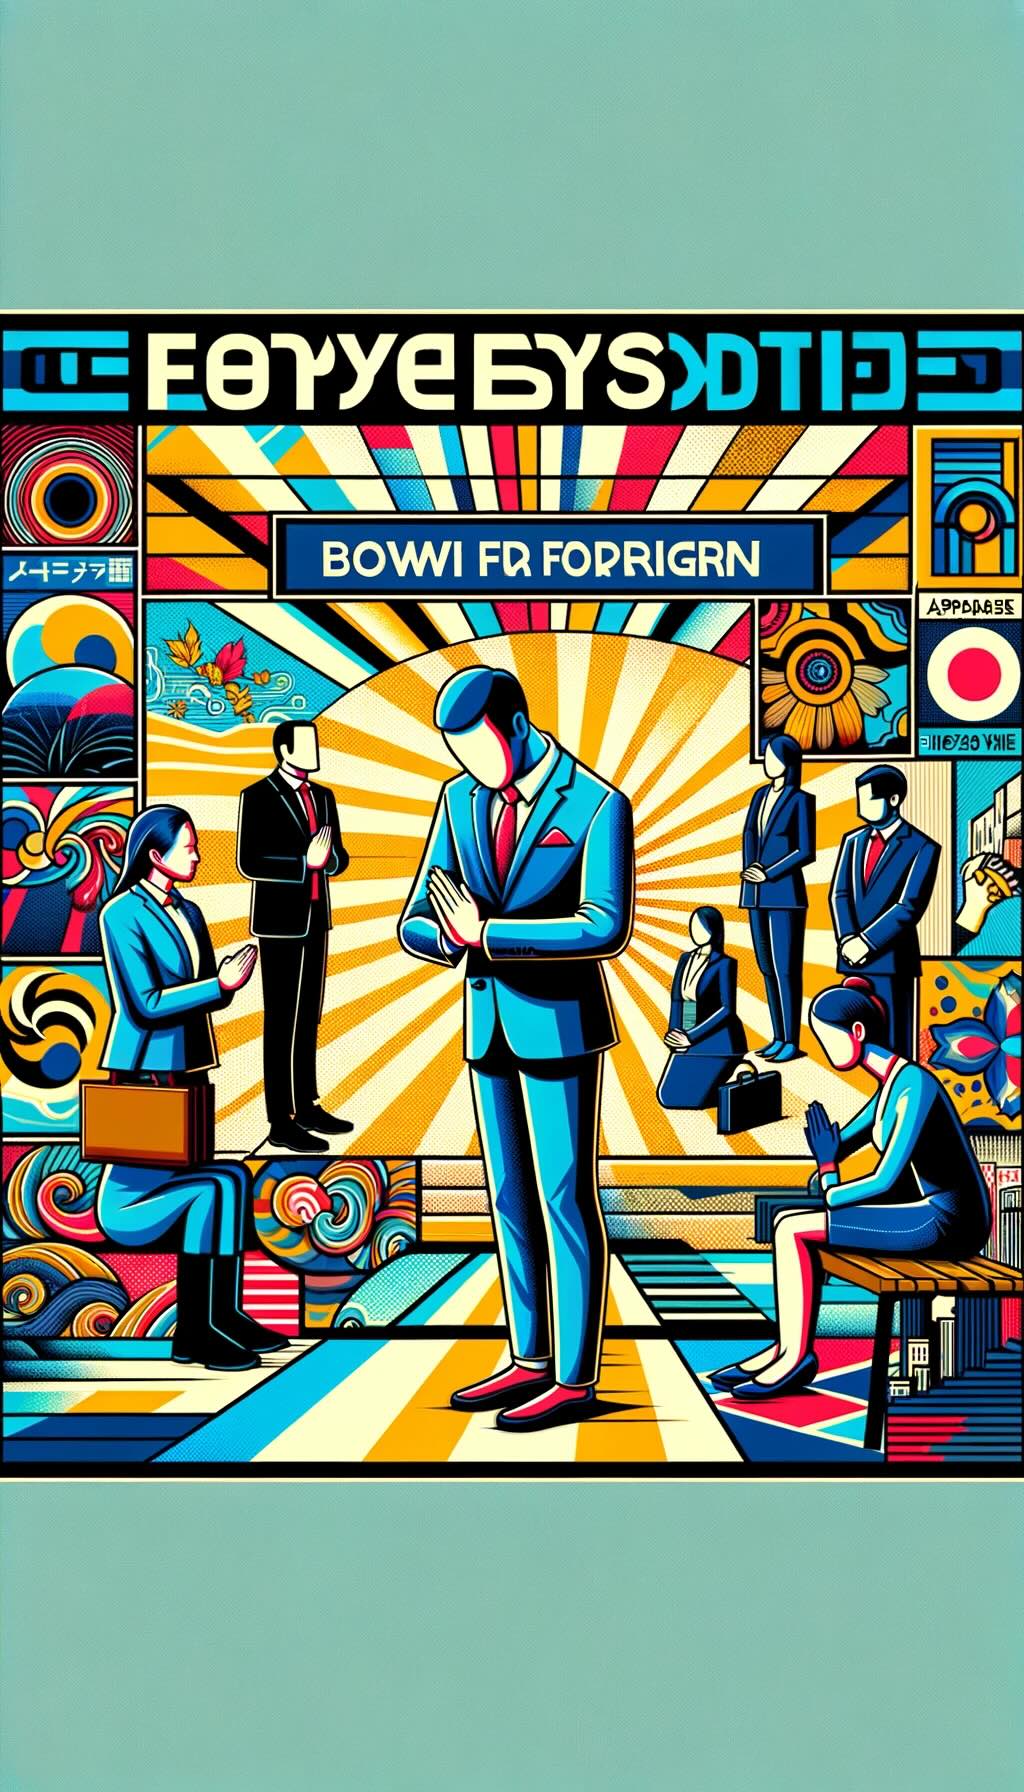 Tips for foreigners on bowing in Japan,  features a foreigner observing and mimicking local Japanese people in various bowing scenarios, such as business meetings and casual encounters. Includes elements that signify respect for cultural norms and natural interaction, emphasizing the balance between the two. It illustrates the concept of forgiveness for minor mistakes in bowing etiquette, with abstract shapes and geometric forms symbolizing understanding and cultural adaptation. It captures the essence of learning and respecting the art of bowing in Japan as experienced by a foreign visitor.